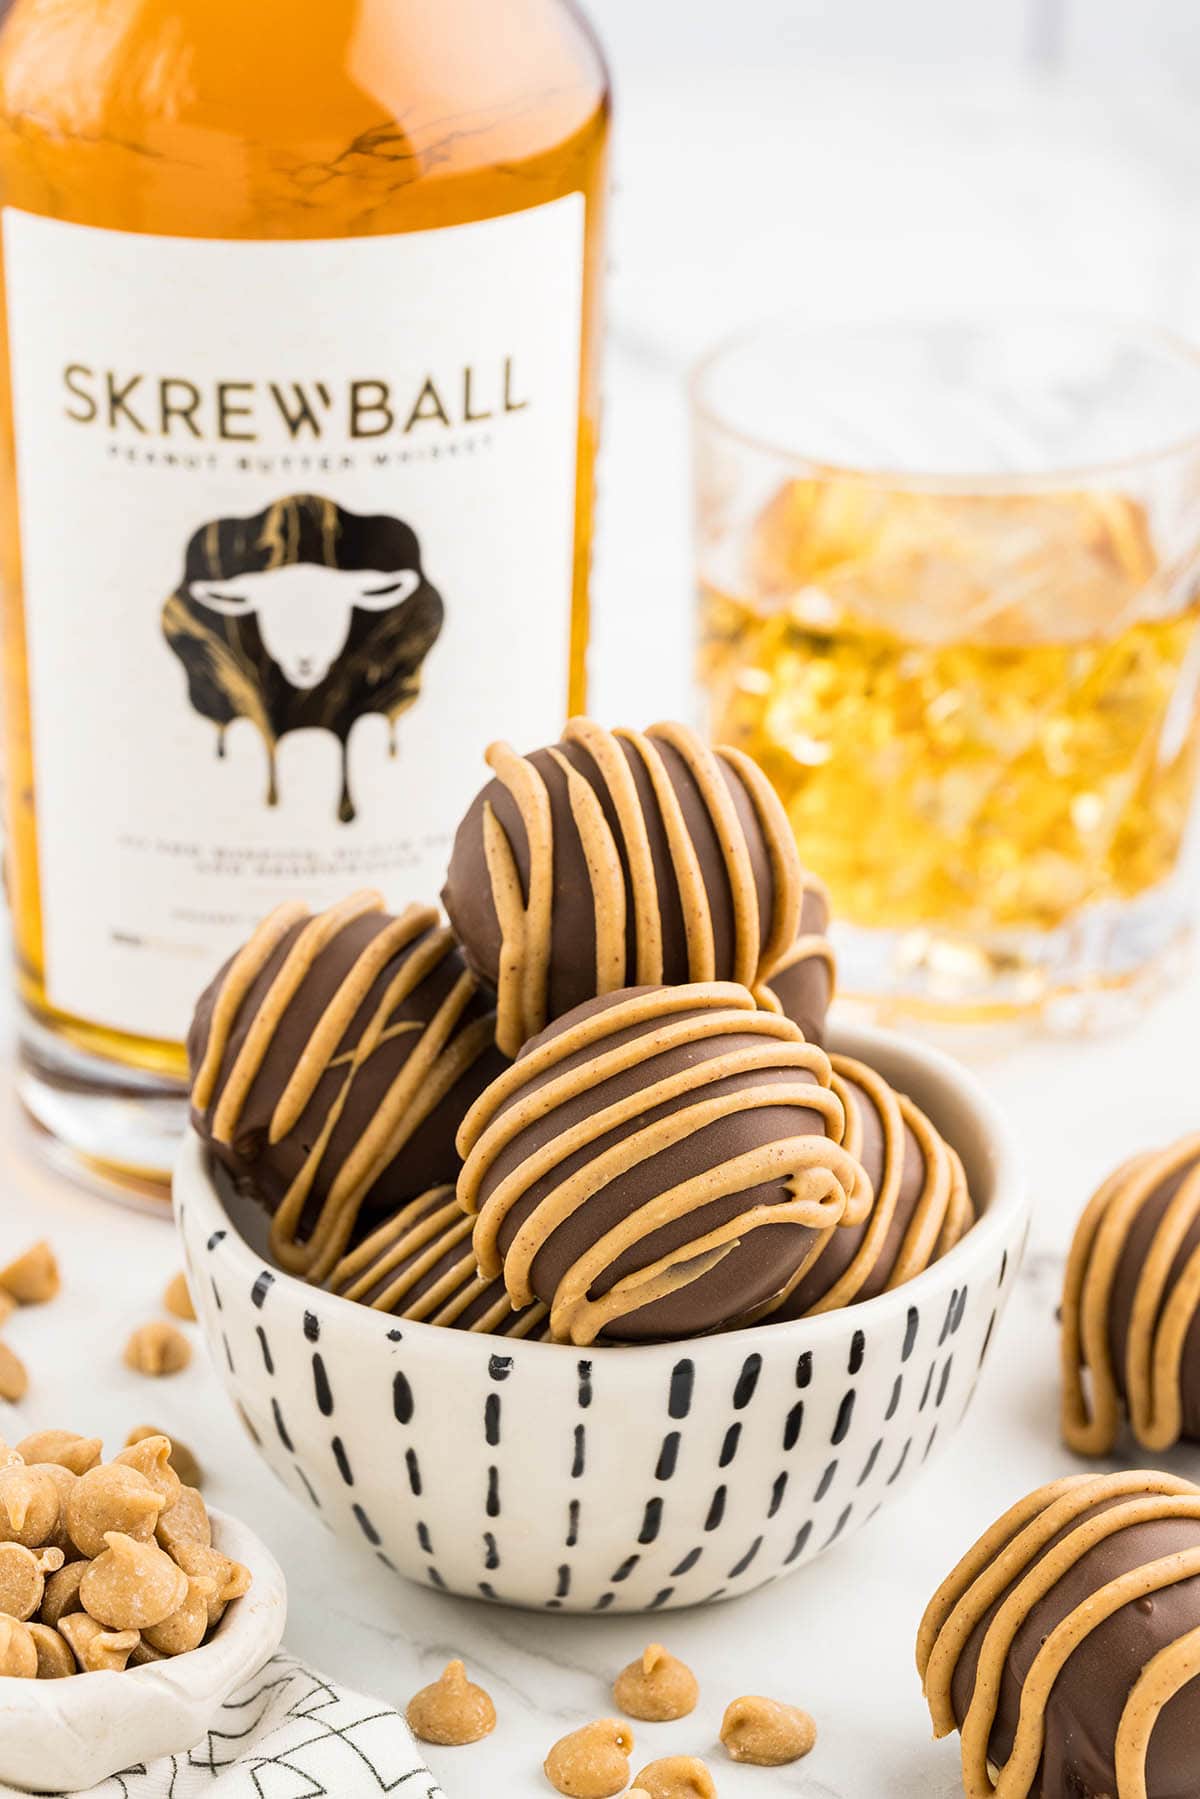 a couple of Whiskey Balls in a bowl with a glass of whiskey and a bottle of skrewball whiskey on the background.